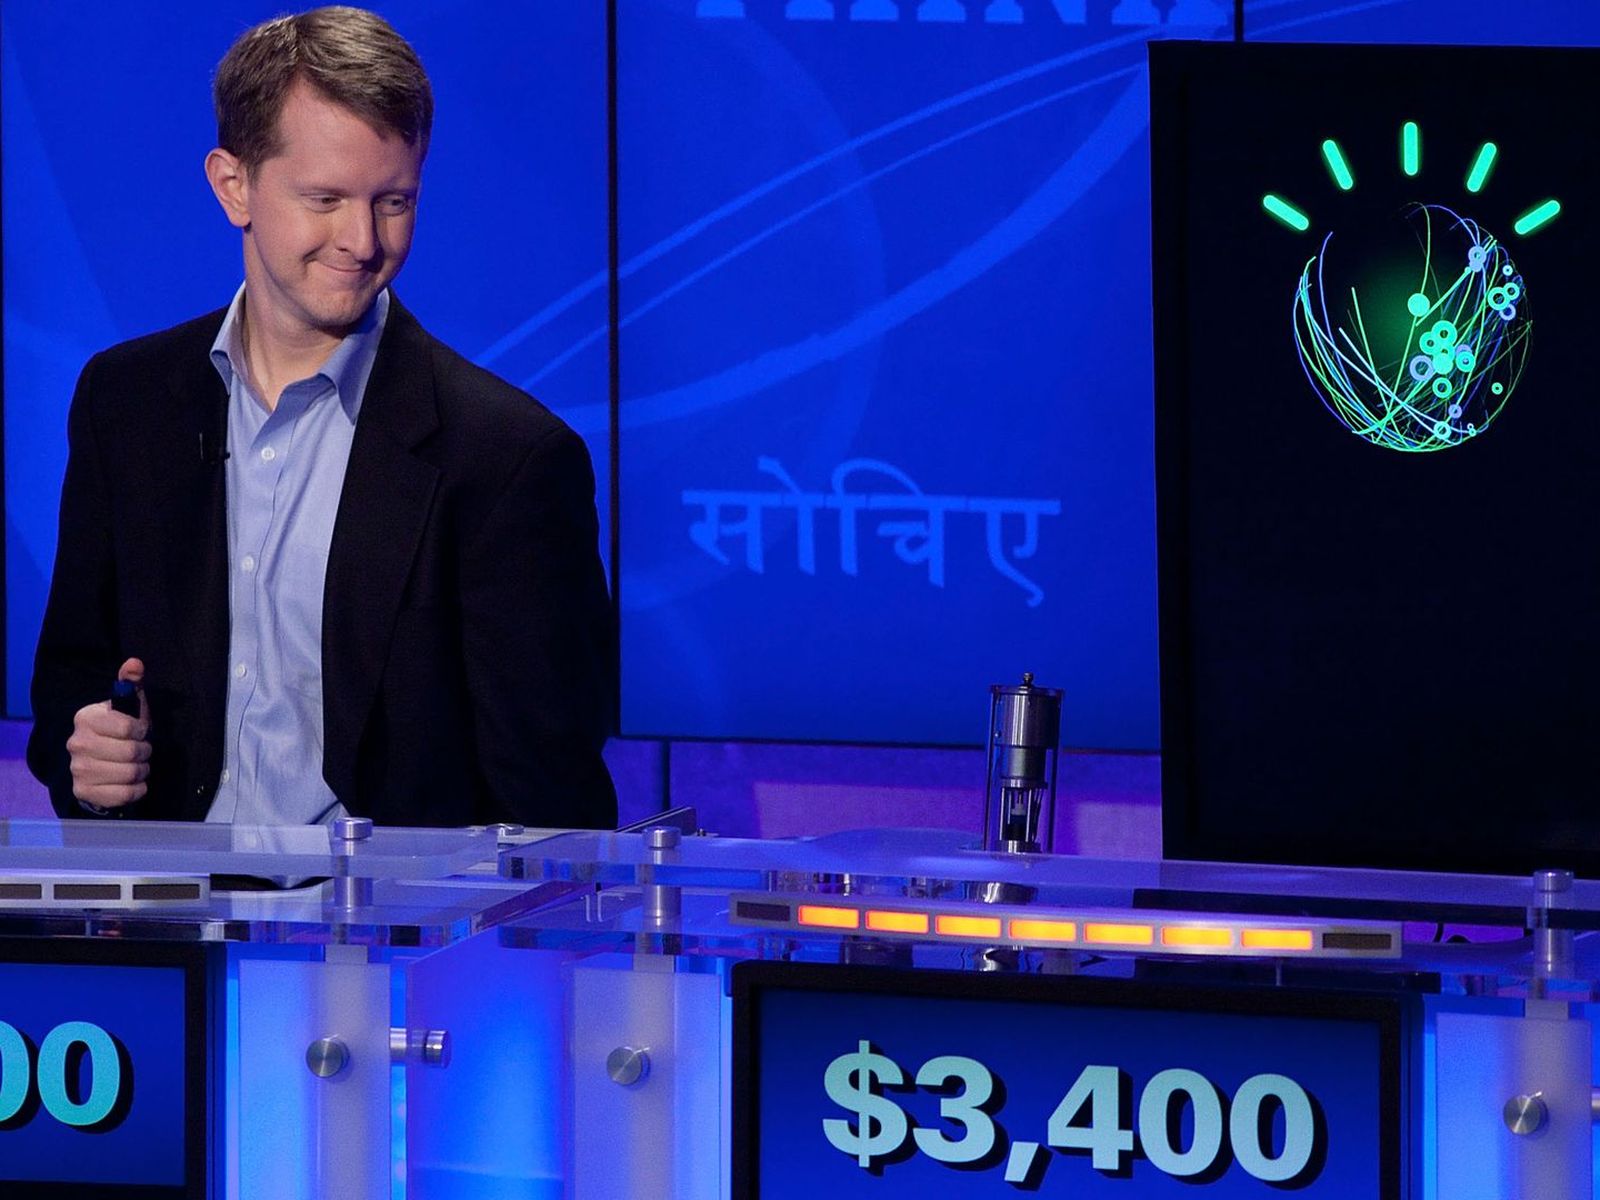 Arne I særdeleshed Intens Looking back at Watson's 2011 "Jeopardy!" win